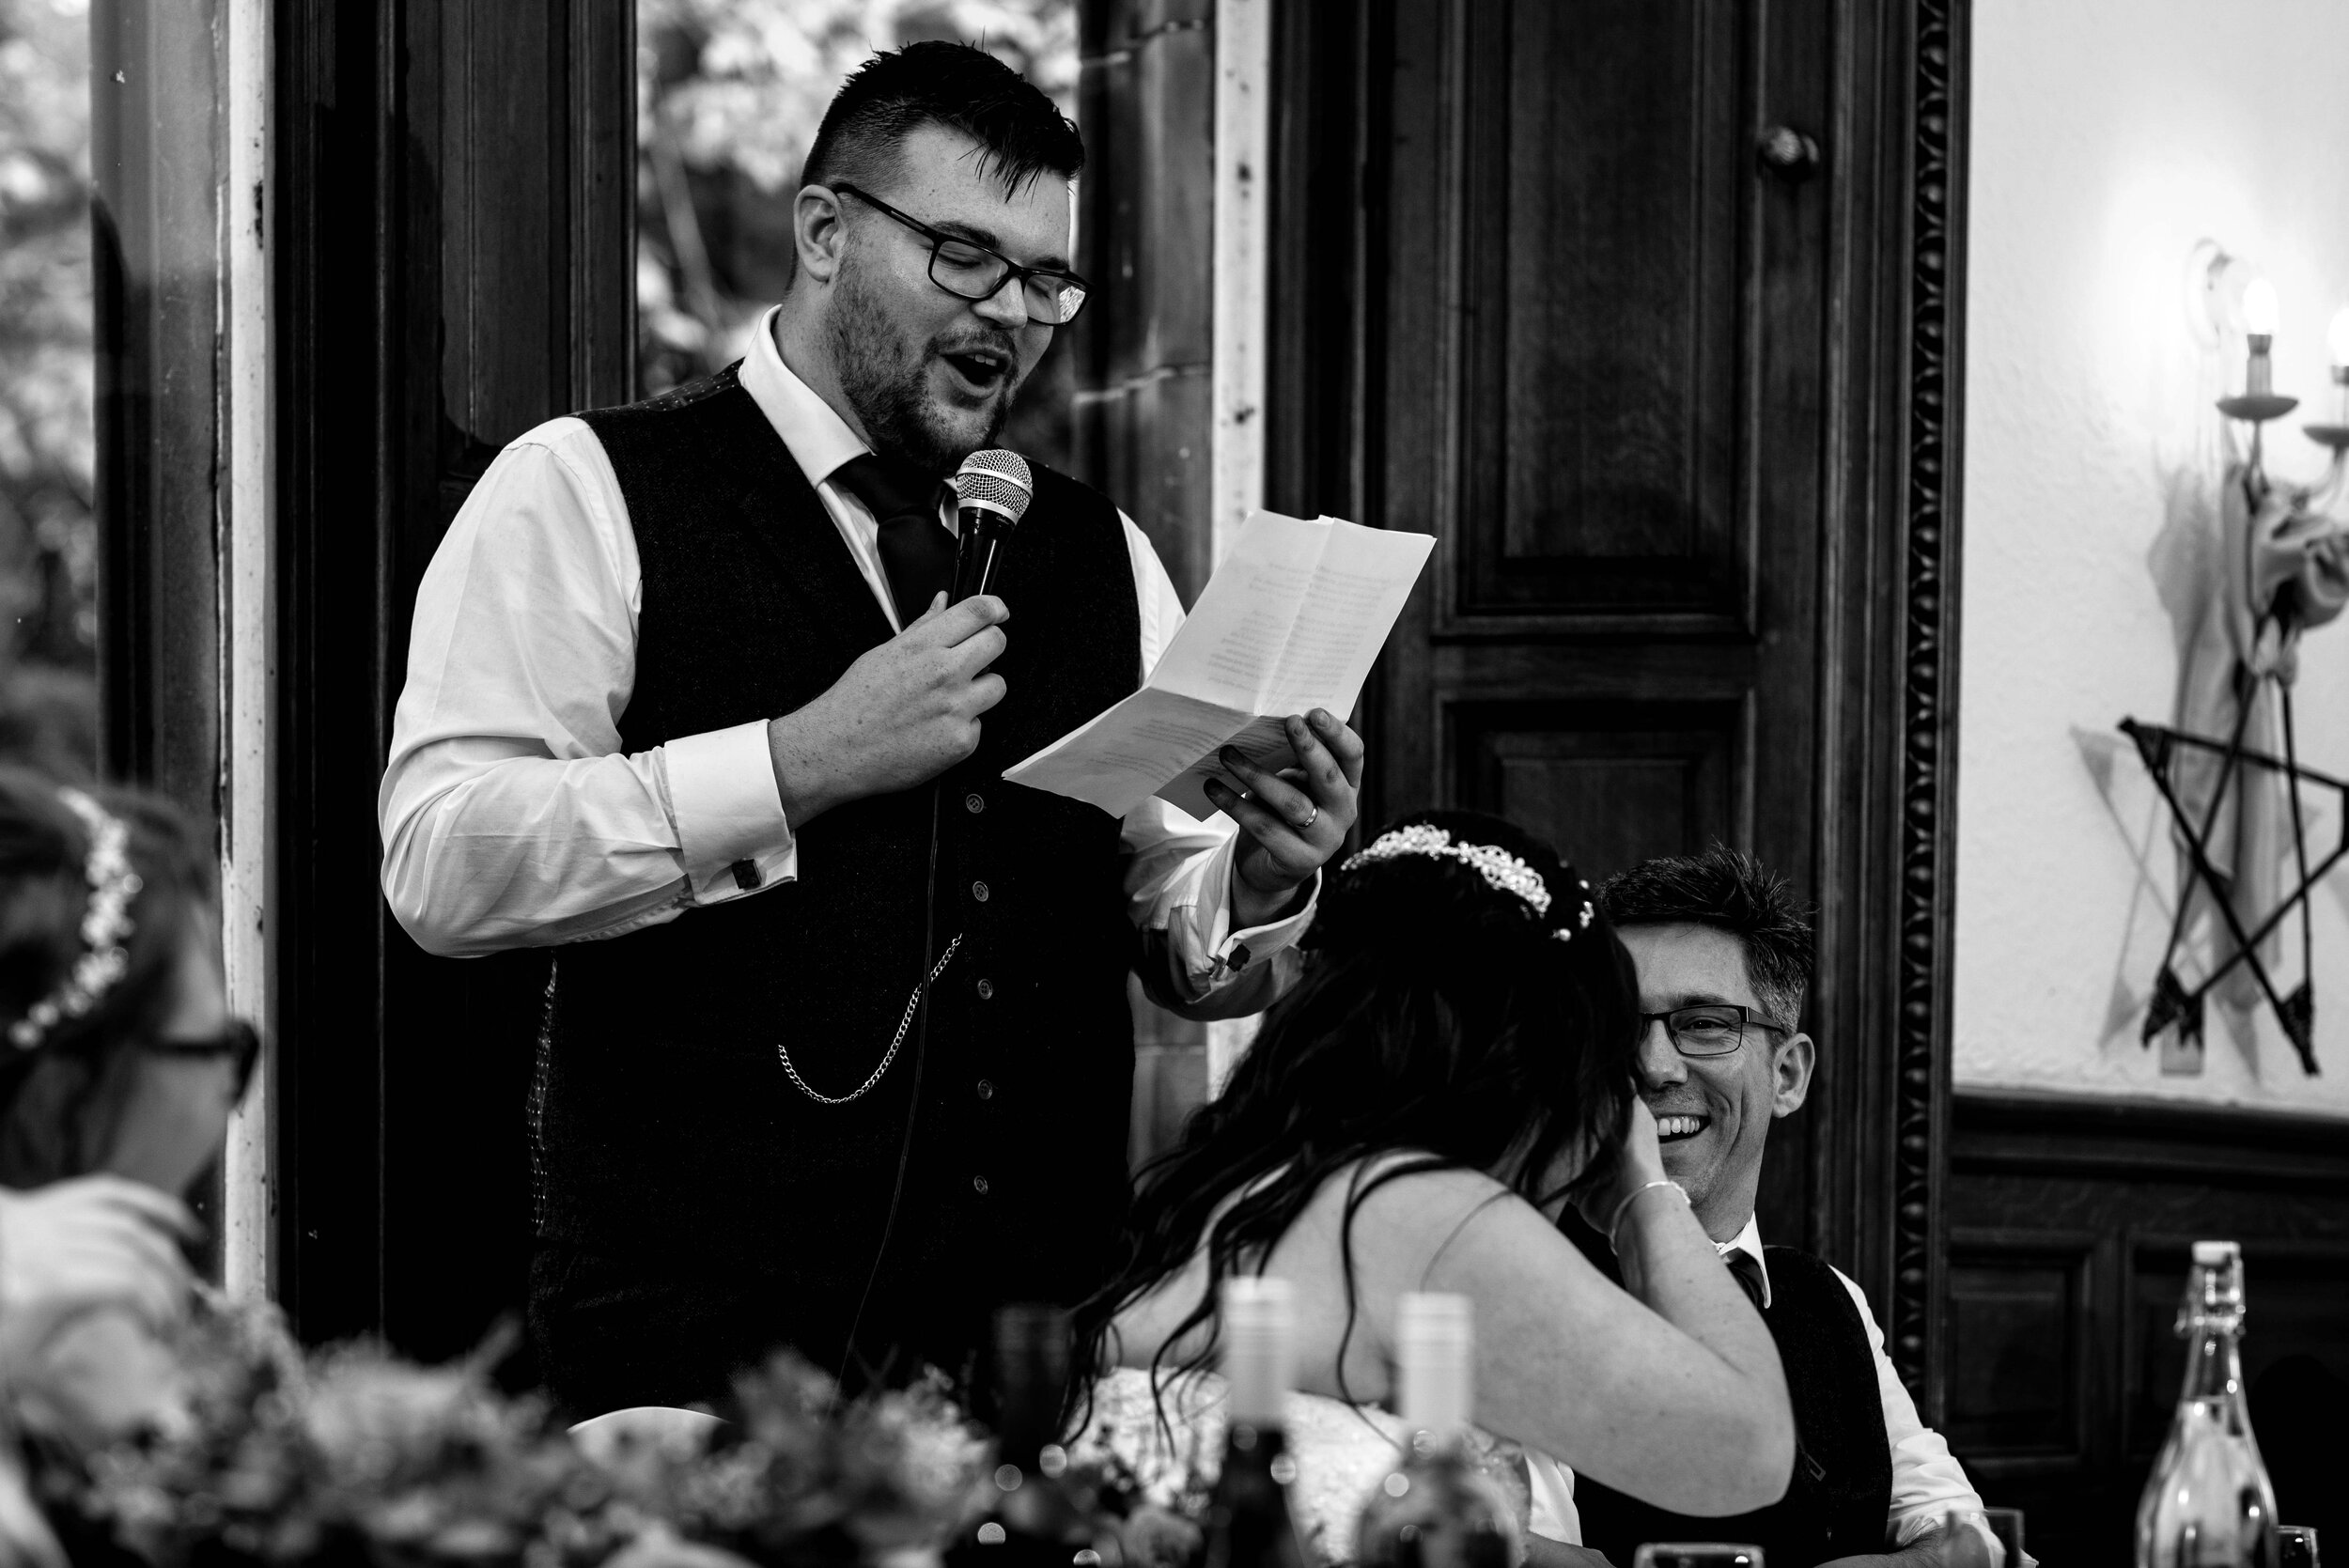 The best man does his speech